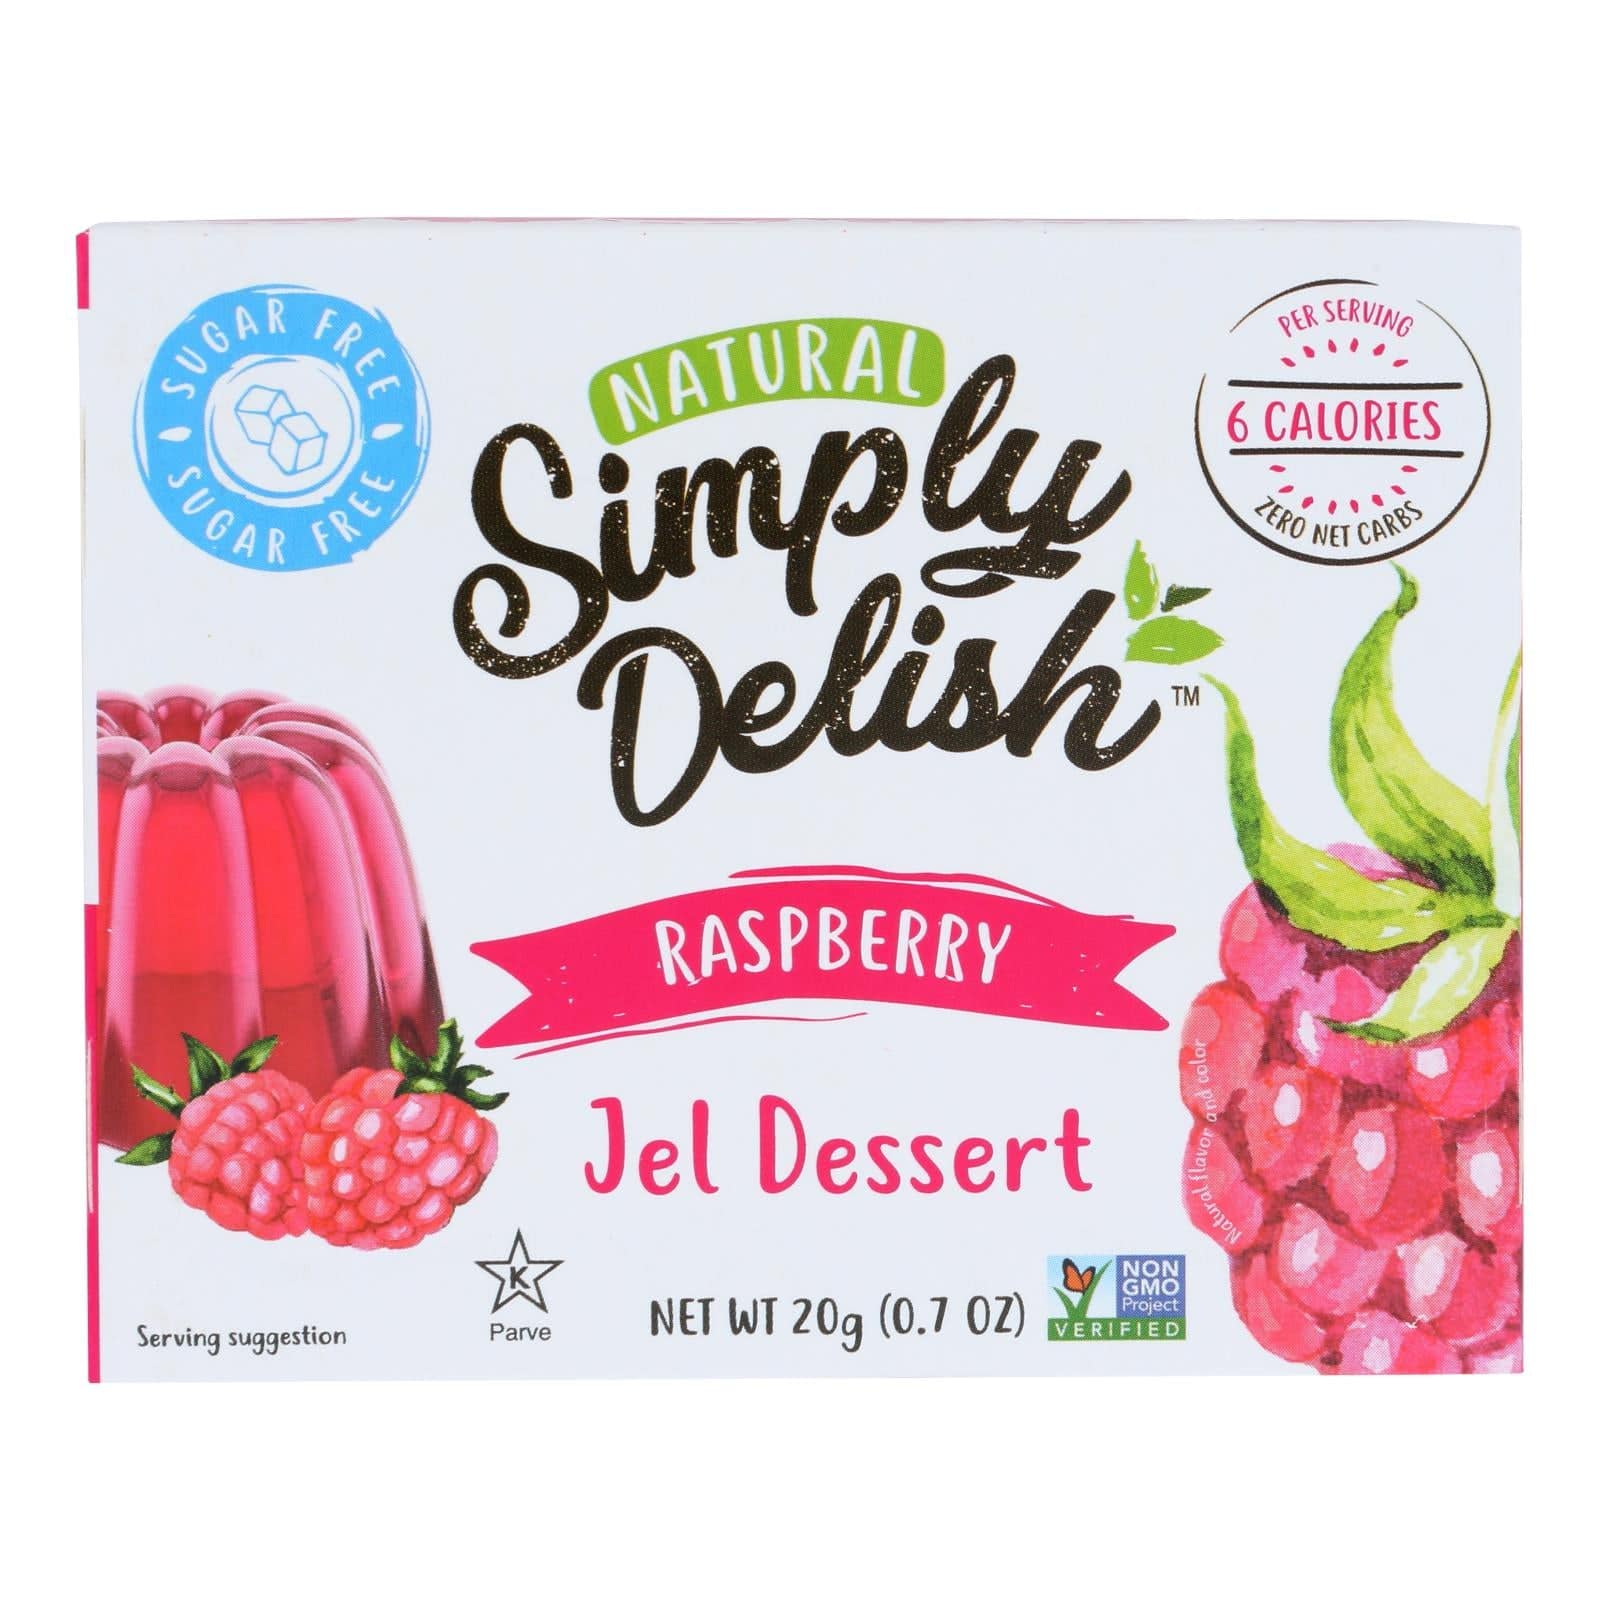 Buy Simply Delish Jel Dessert - Raspberry - Case Of 6 - 1.6 Oz.  at OnlyNaturals.us